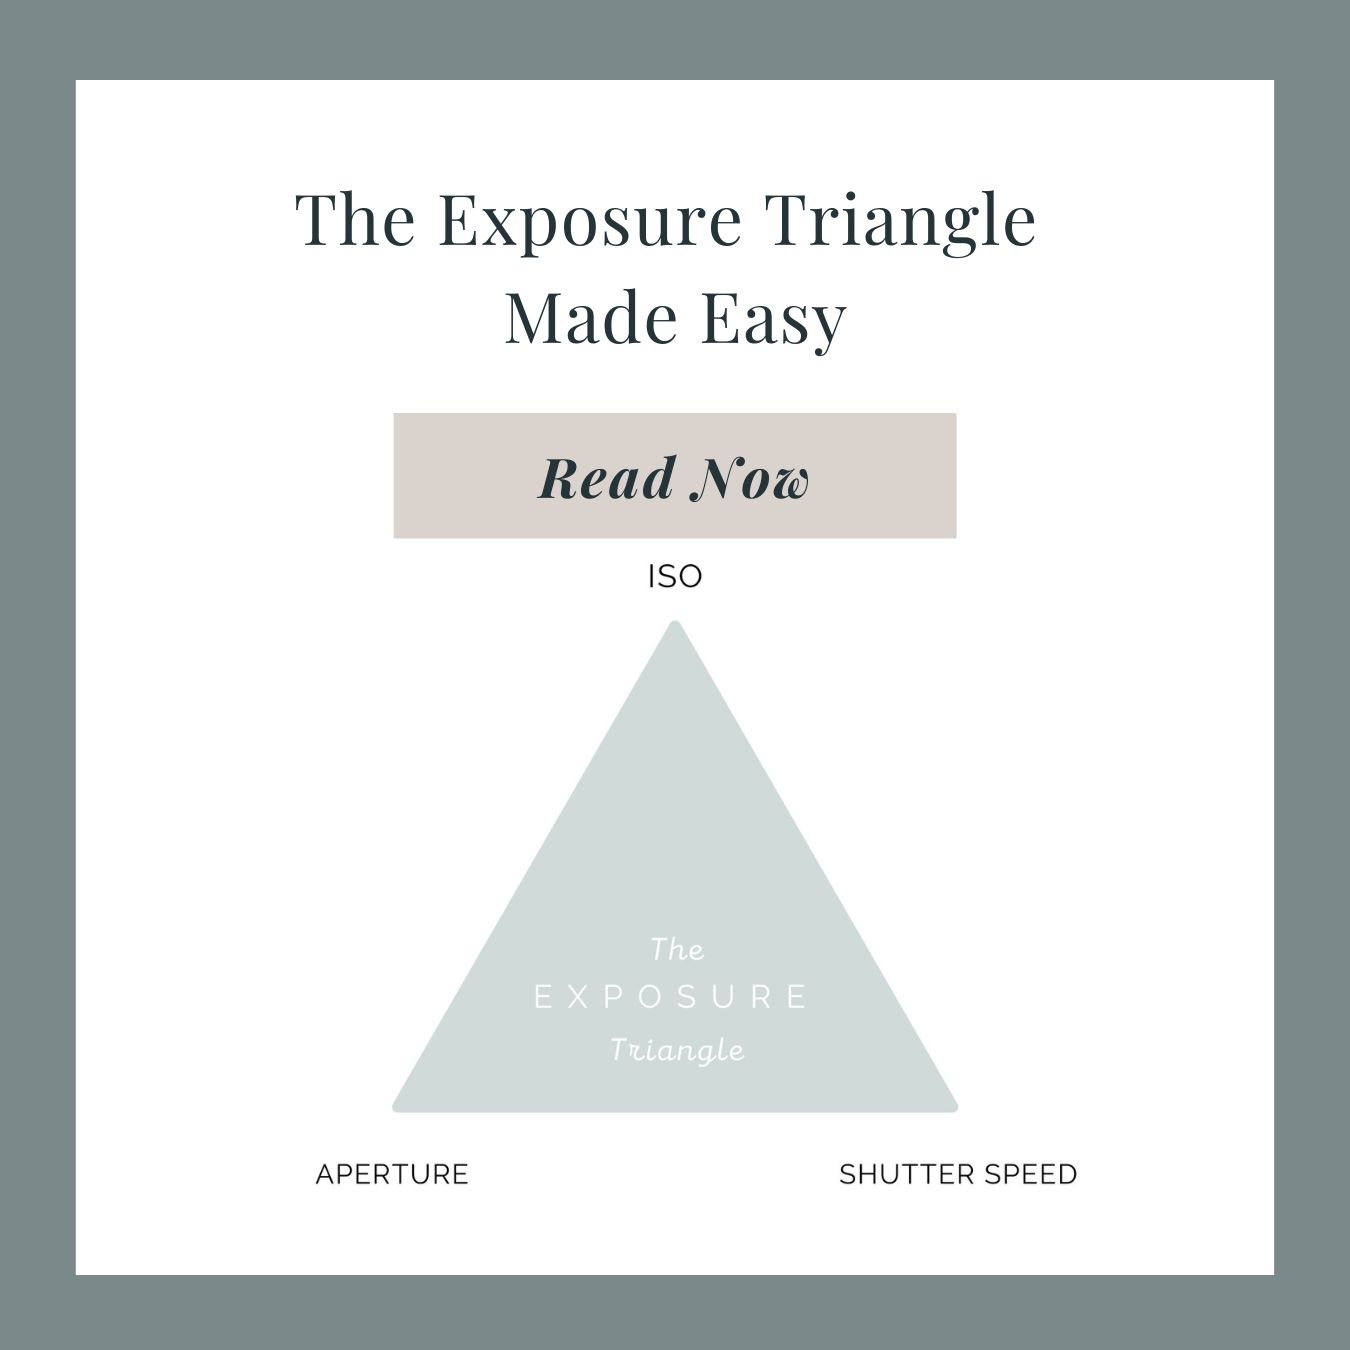 The Exposure Triangle Made Easy blog